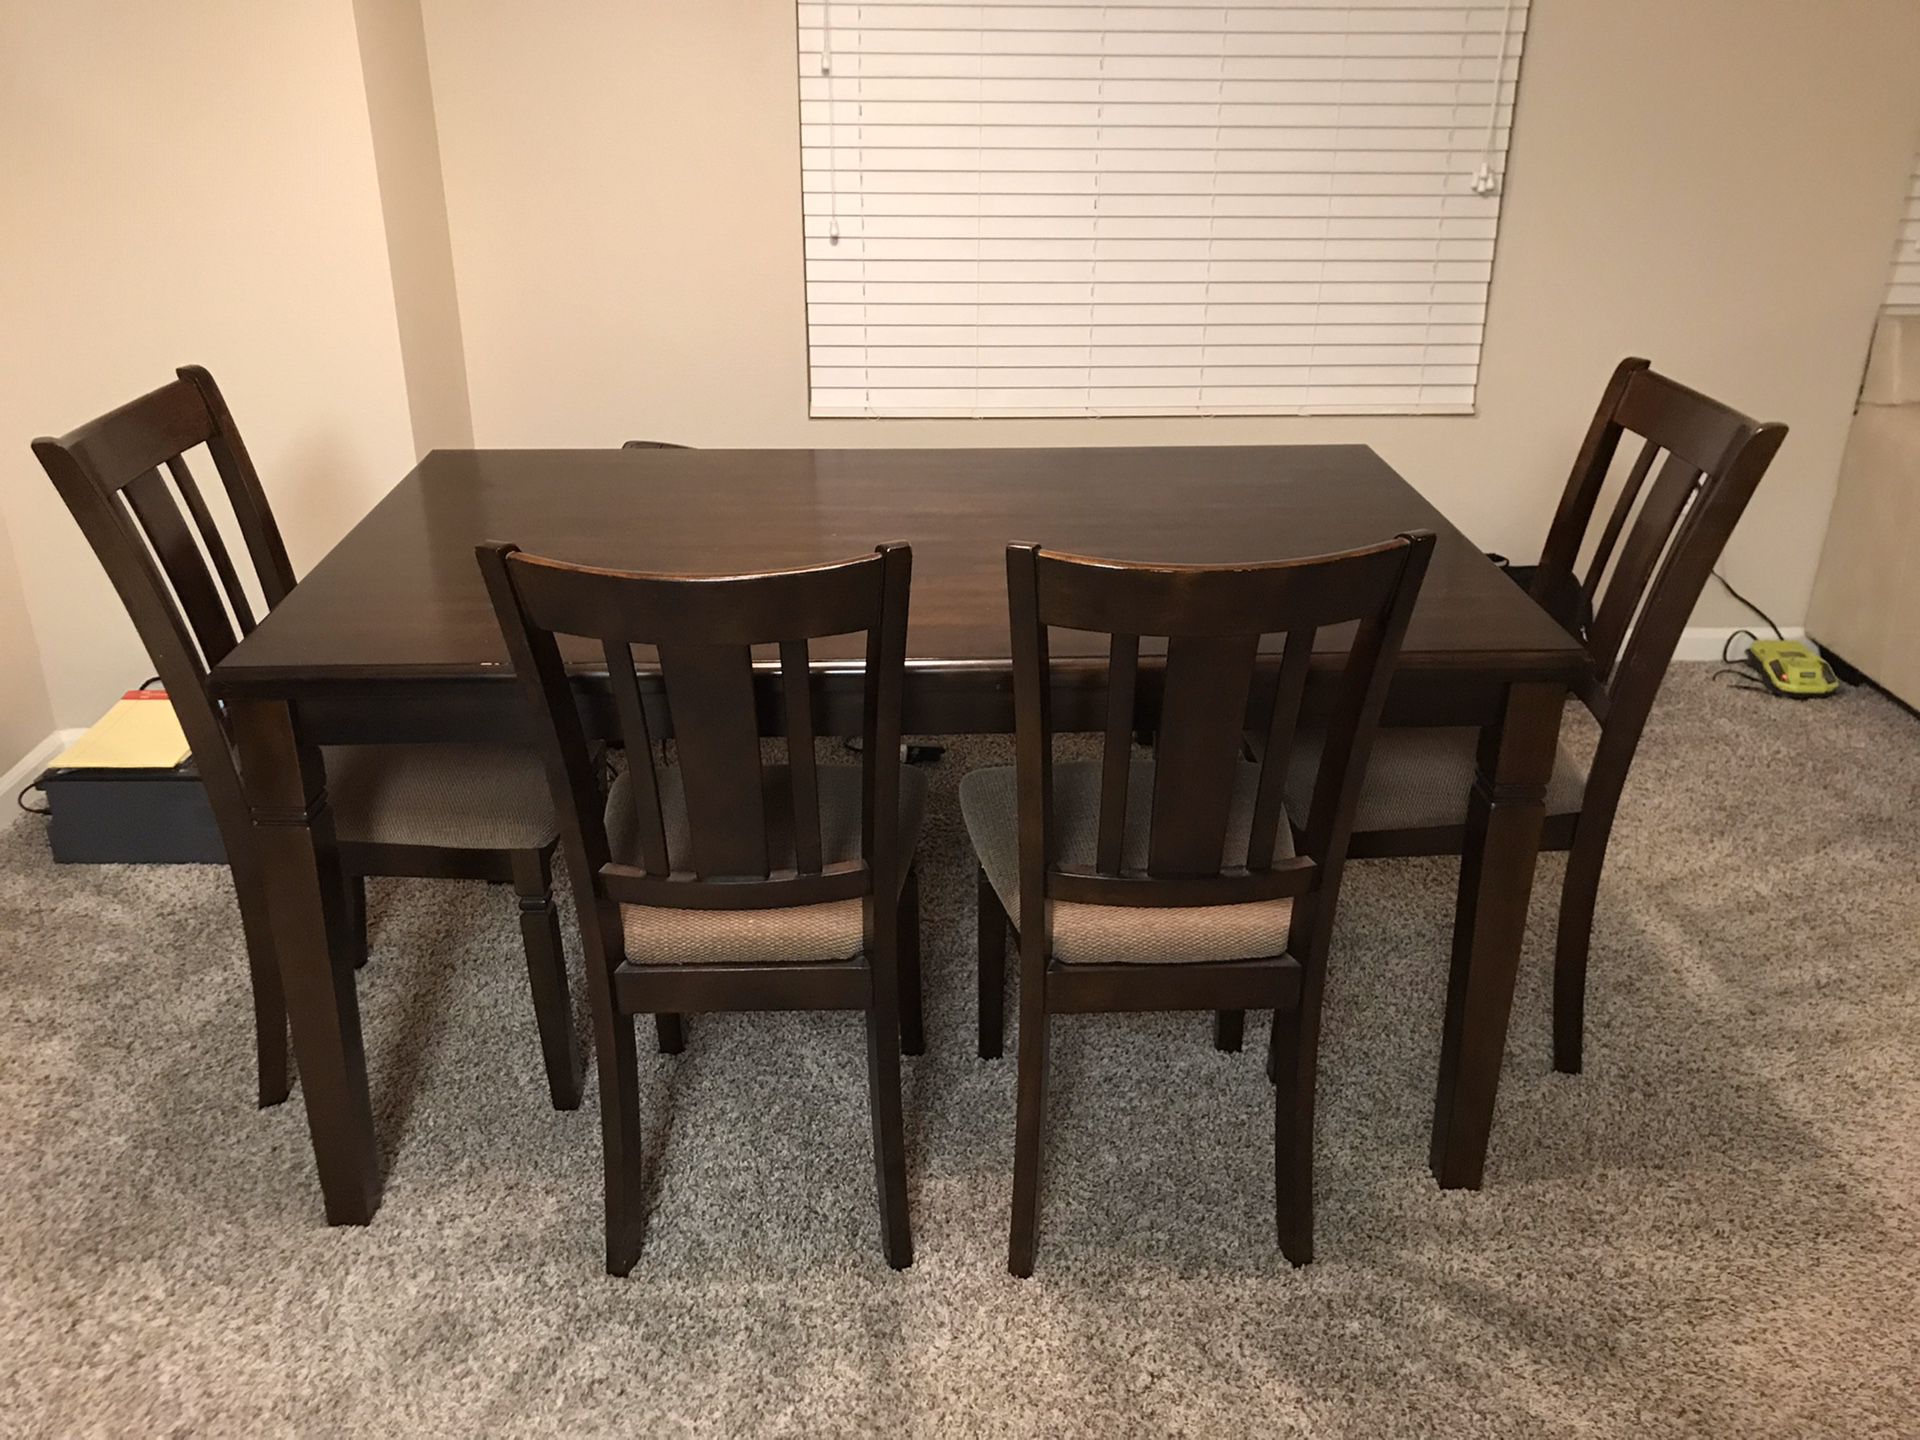 Beautiful Dining Room Set / seats 6 with Bench. Cool look. Excellent Condition !